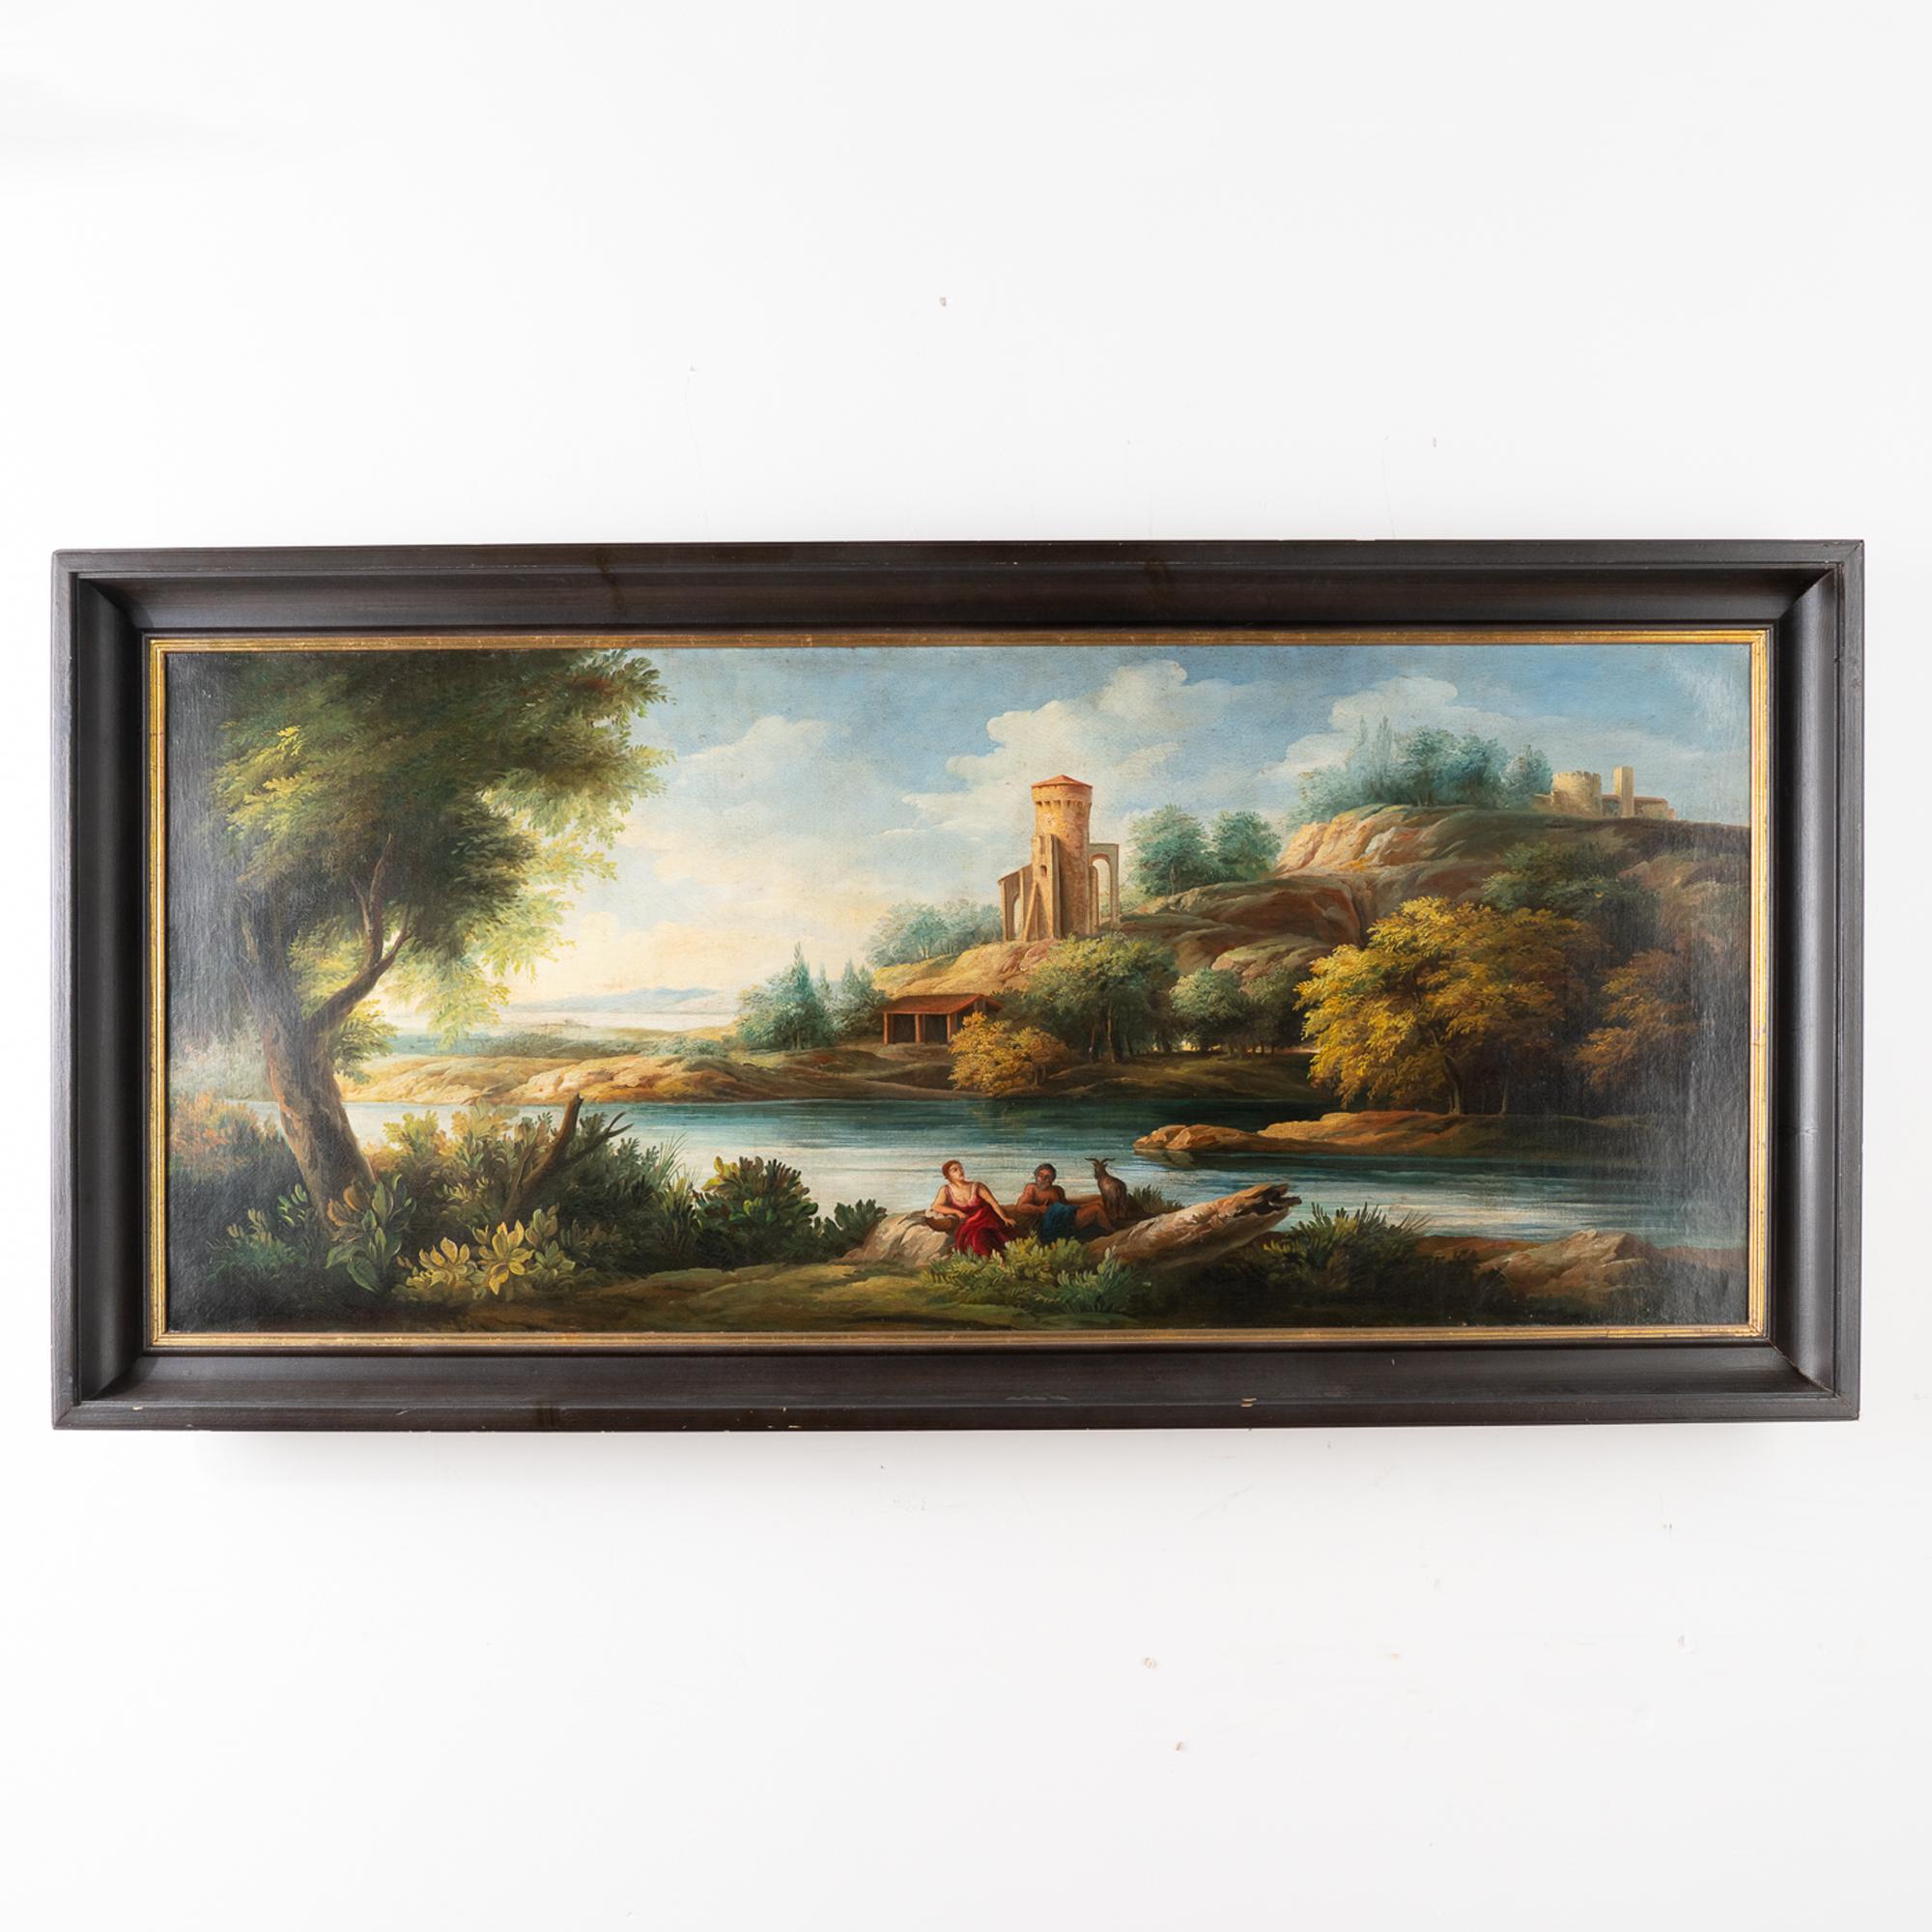 Original oil on canvas painting of landscape with resting couple in the foreground and castle on the distant hill (upper right corner).
The impressive 6' length adds to the visual impact of this lovely old painting displaying lovely hues of blues